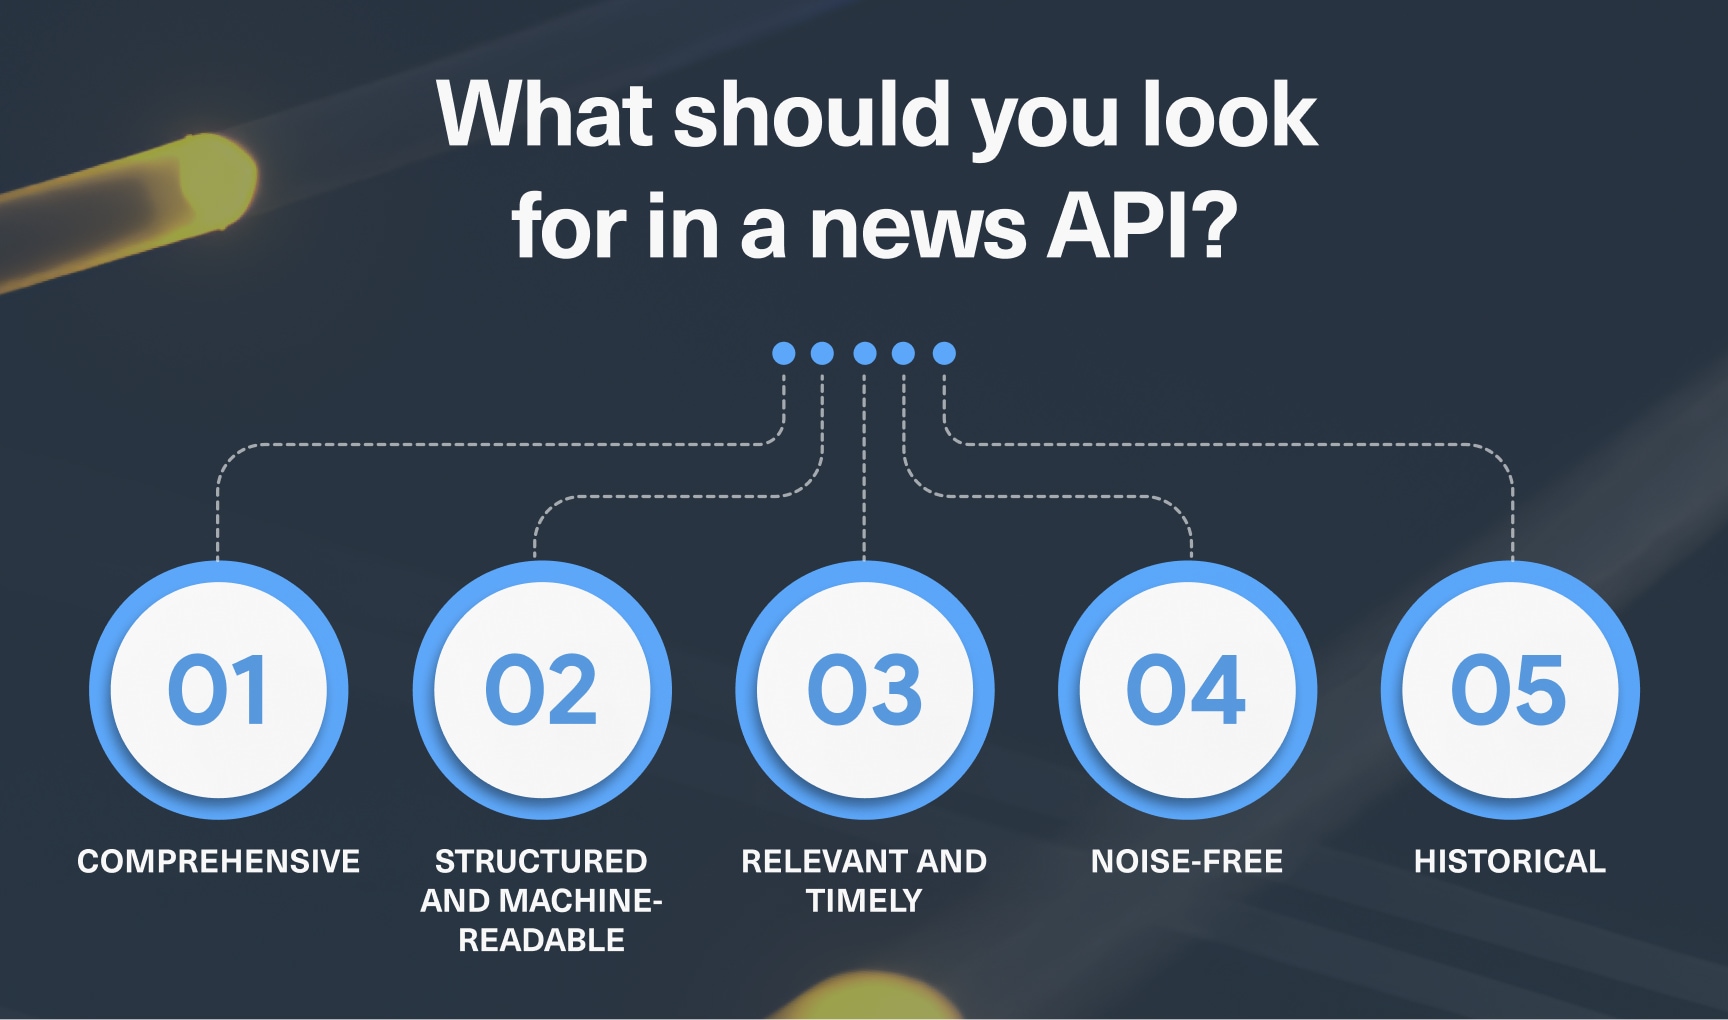 Things you should look for in a news API: comprehensiveness, structured and machine-readable, relevant and timely, noise free and historical.